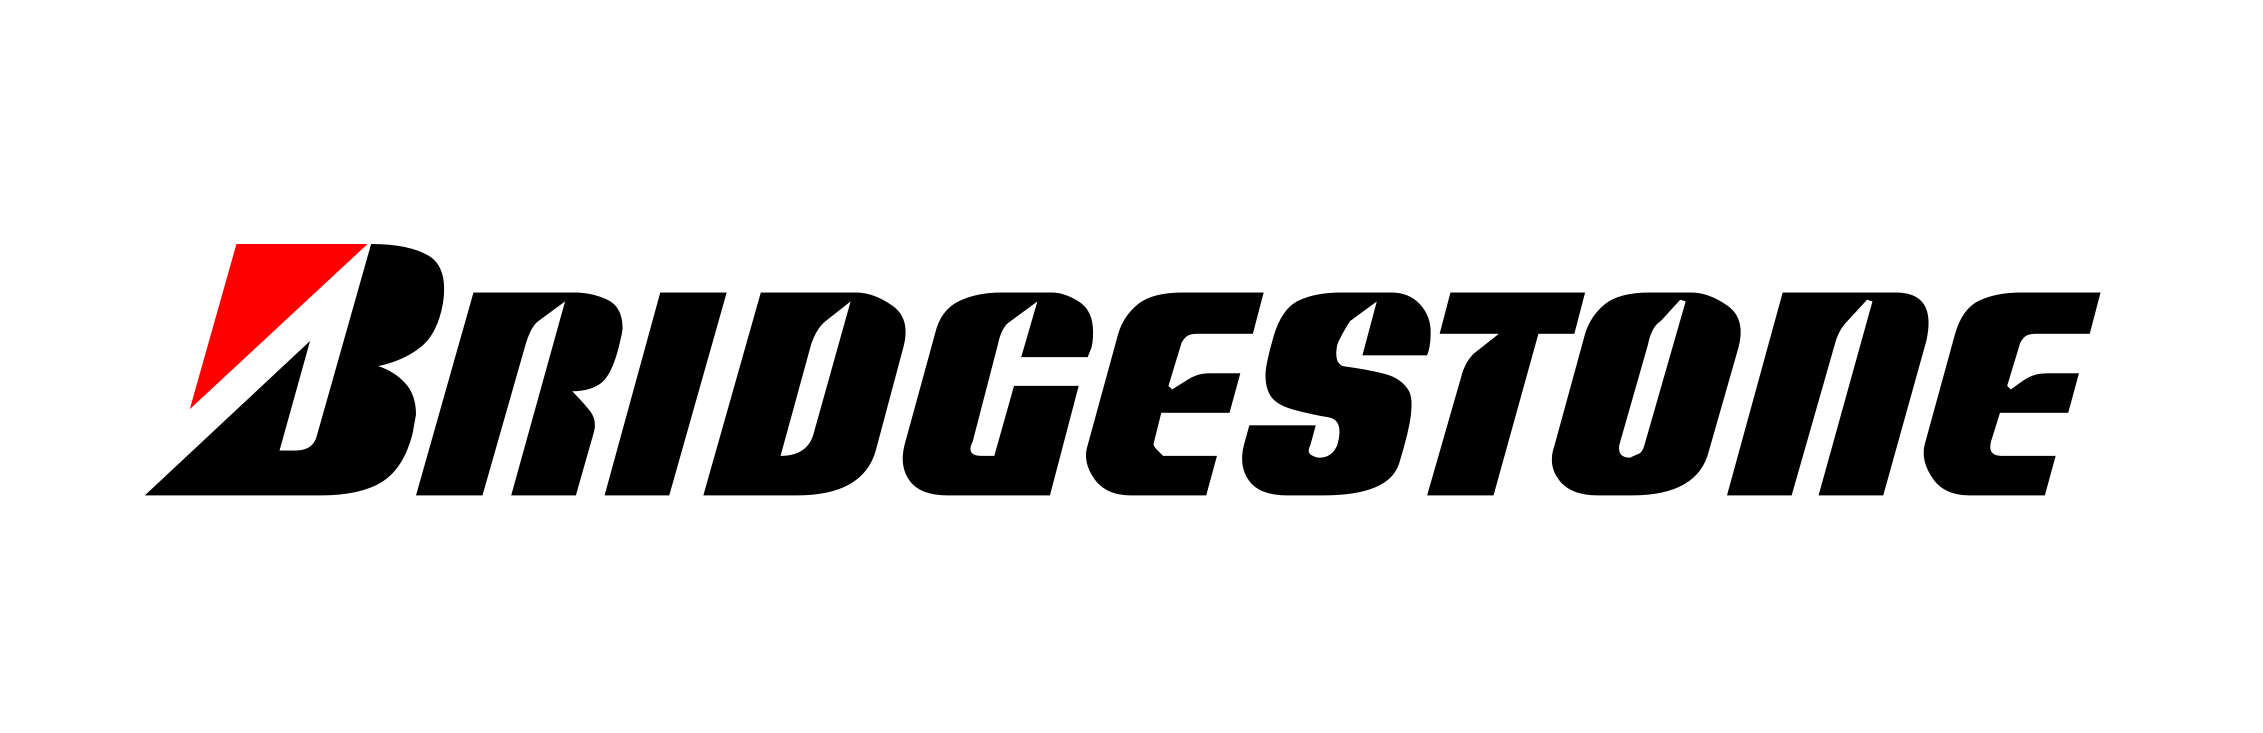 It Is Not Just Its History But Its Offerings That Sets Bridgestone Apart From The Rest Of The Tyre Makers. Its Tyres Have Stood The Test Of Time. - Bridgestone, Transparent background PNG HD thumbnail